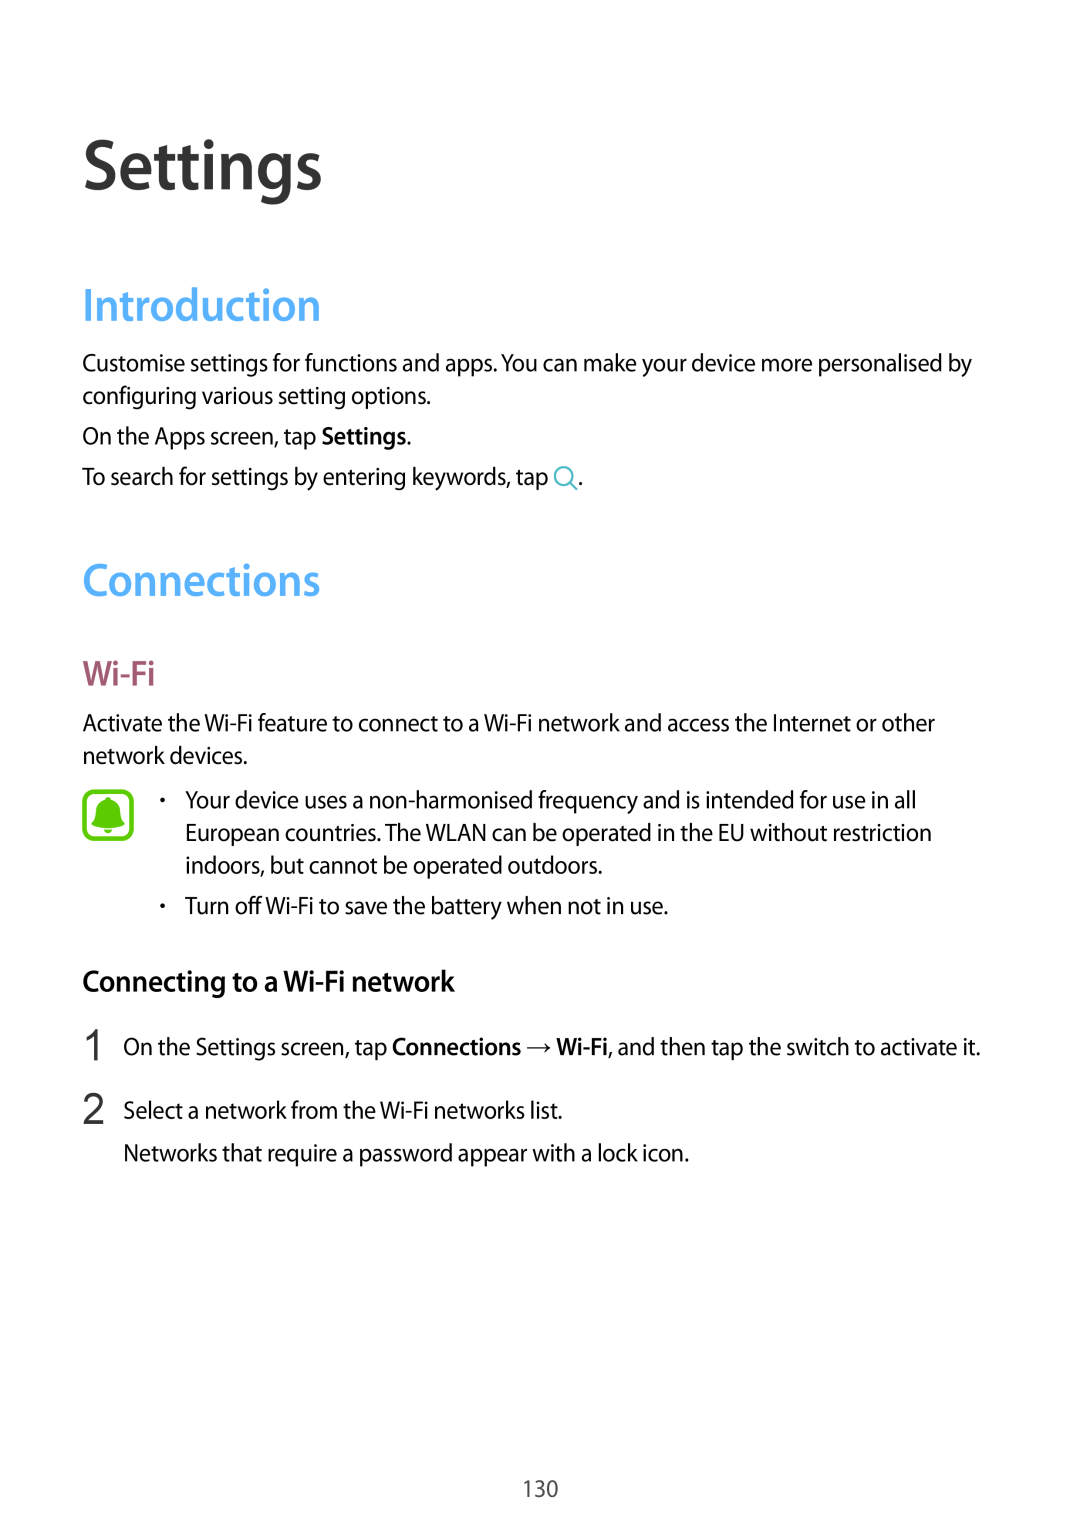 Samsung SM-G928FZDACYO, SM-G925FZKADBT manual Settings, Introduction, Connections, Connecting to a Wi-Fi network 